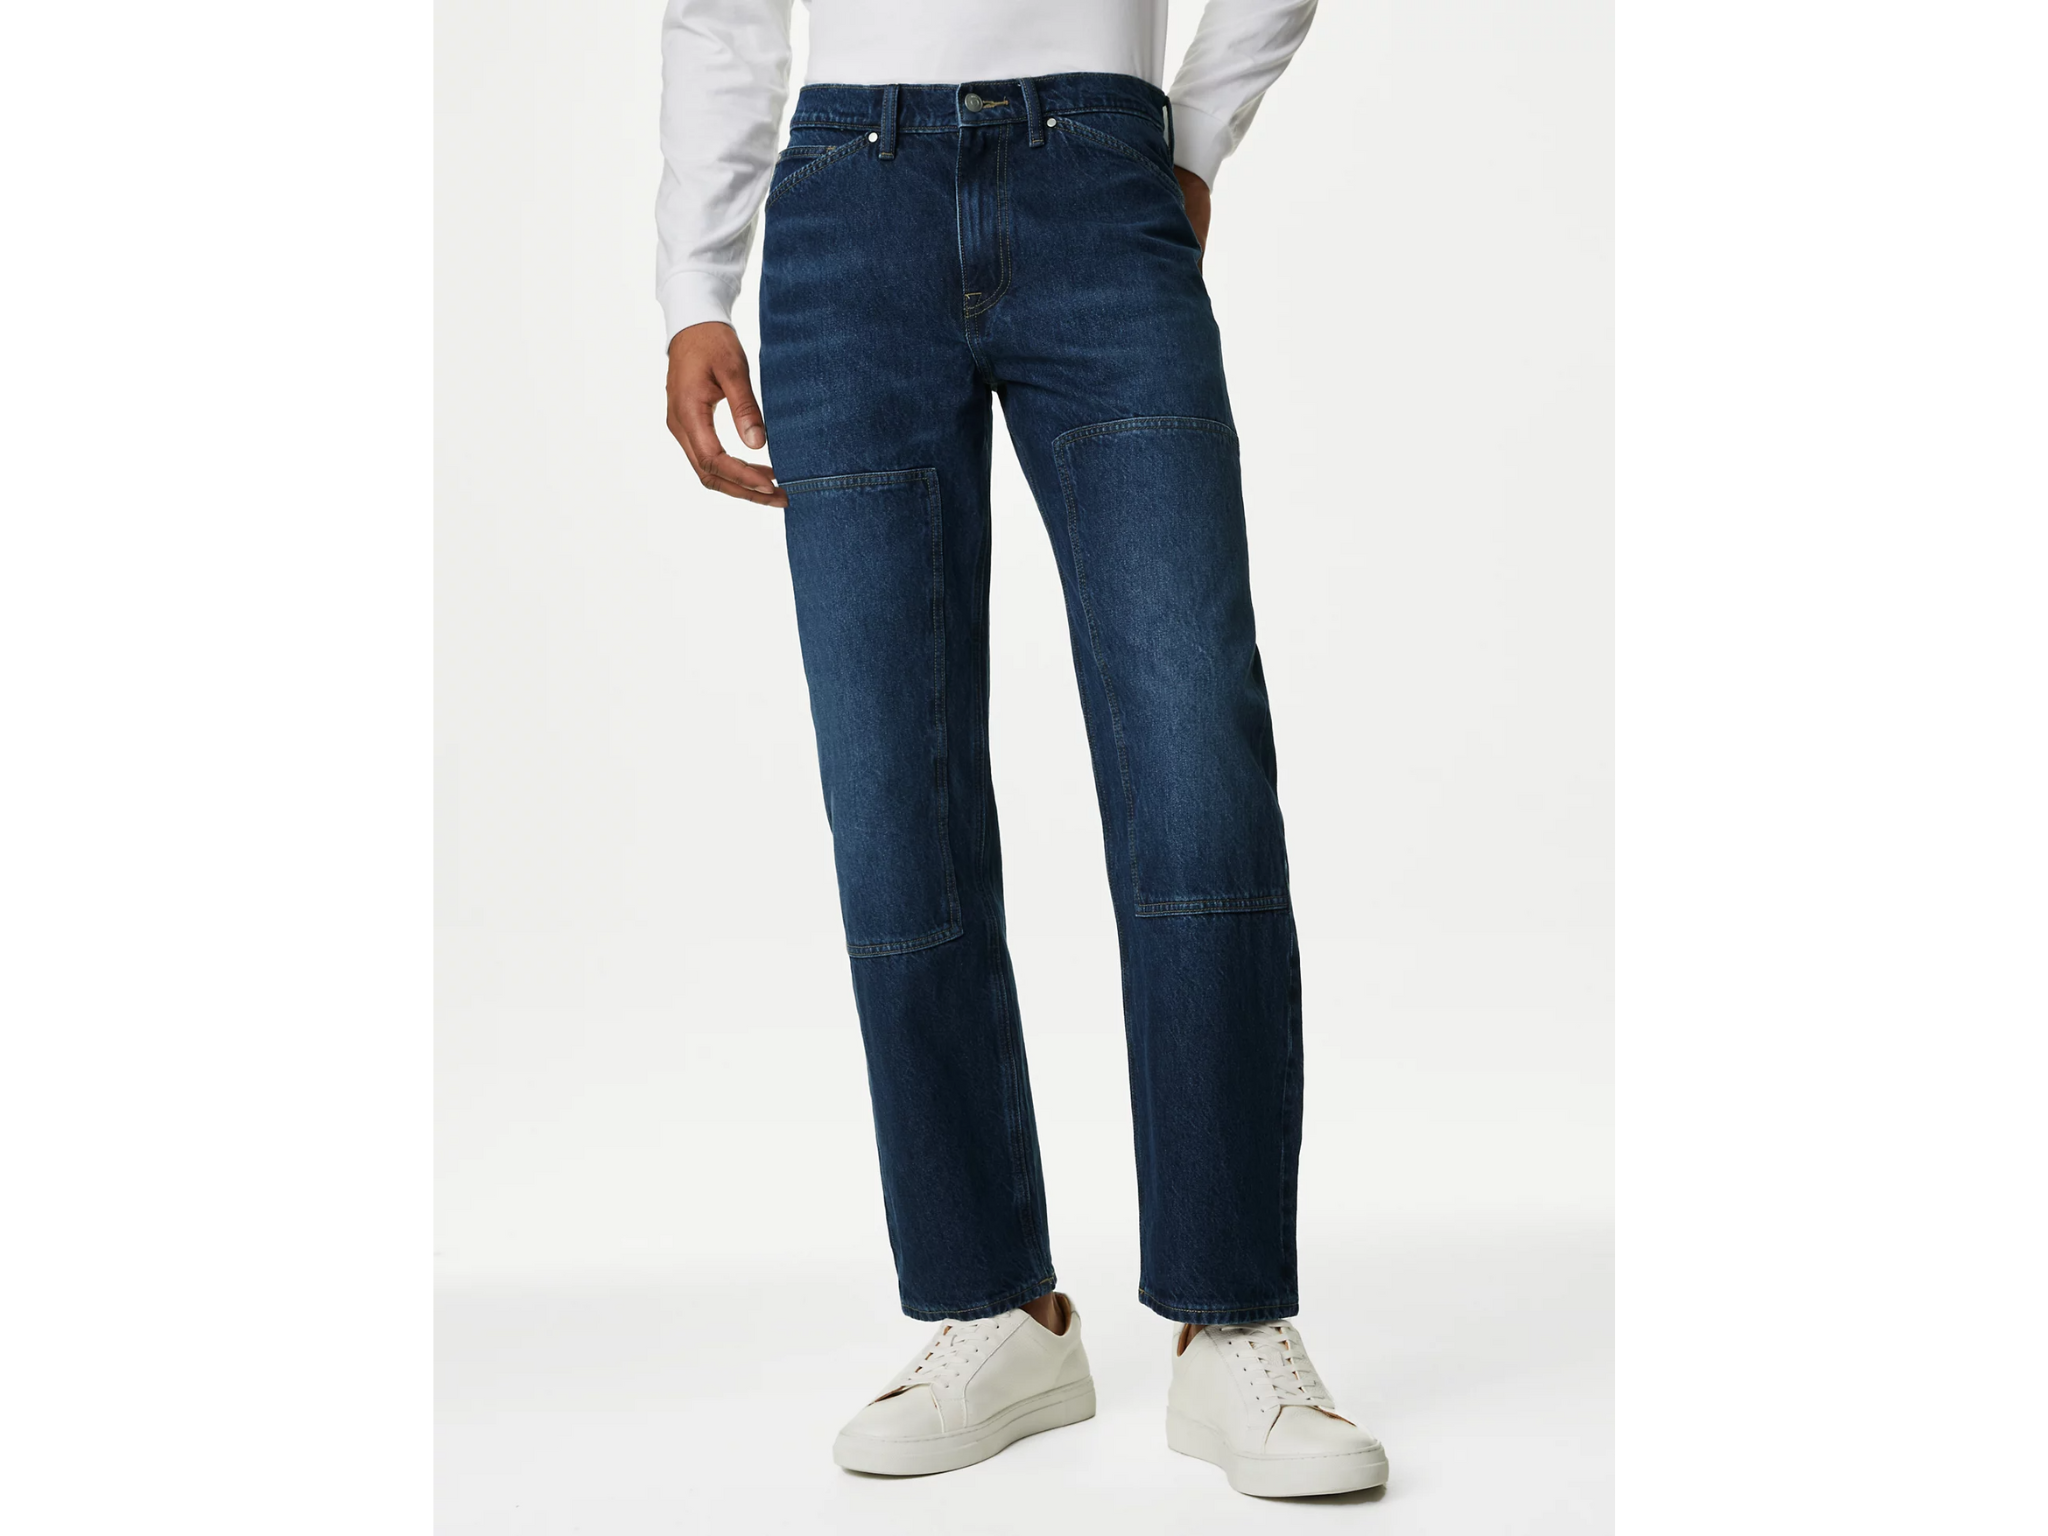 M&S loose fit double knee jean